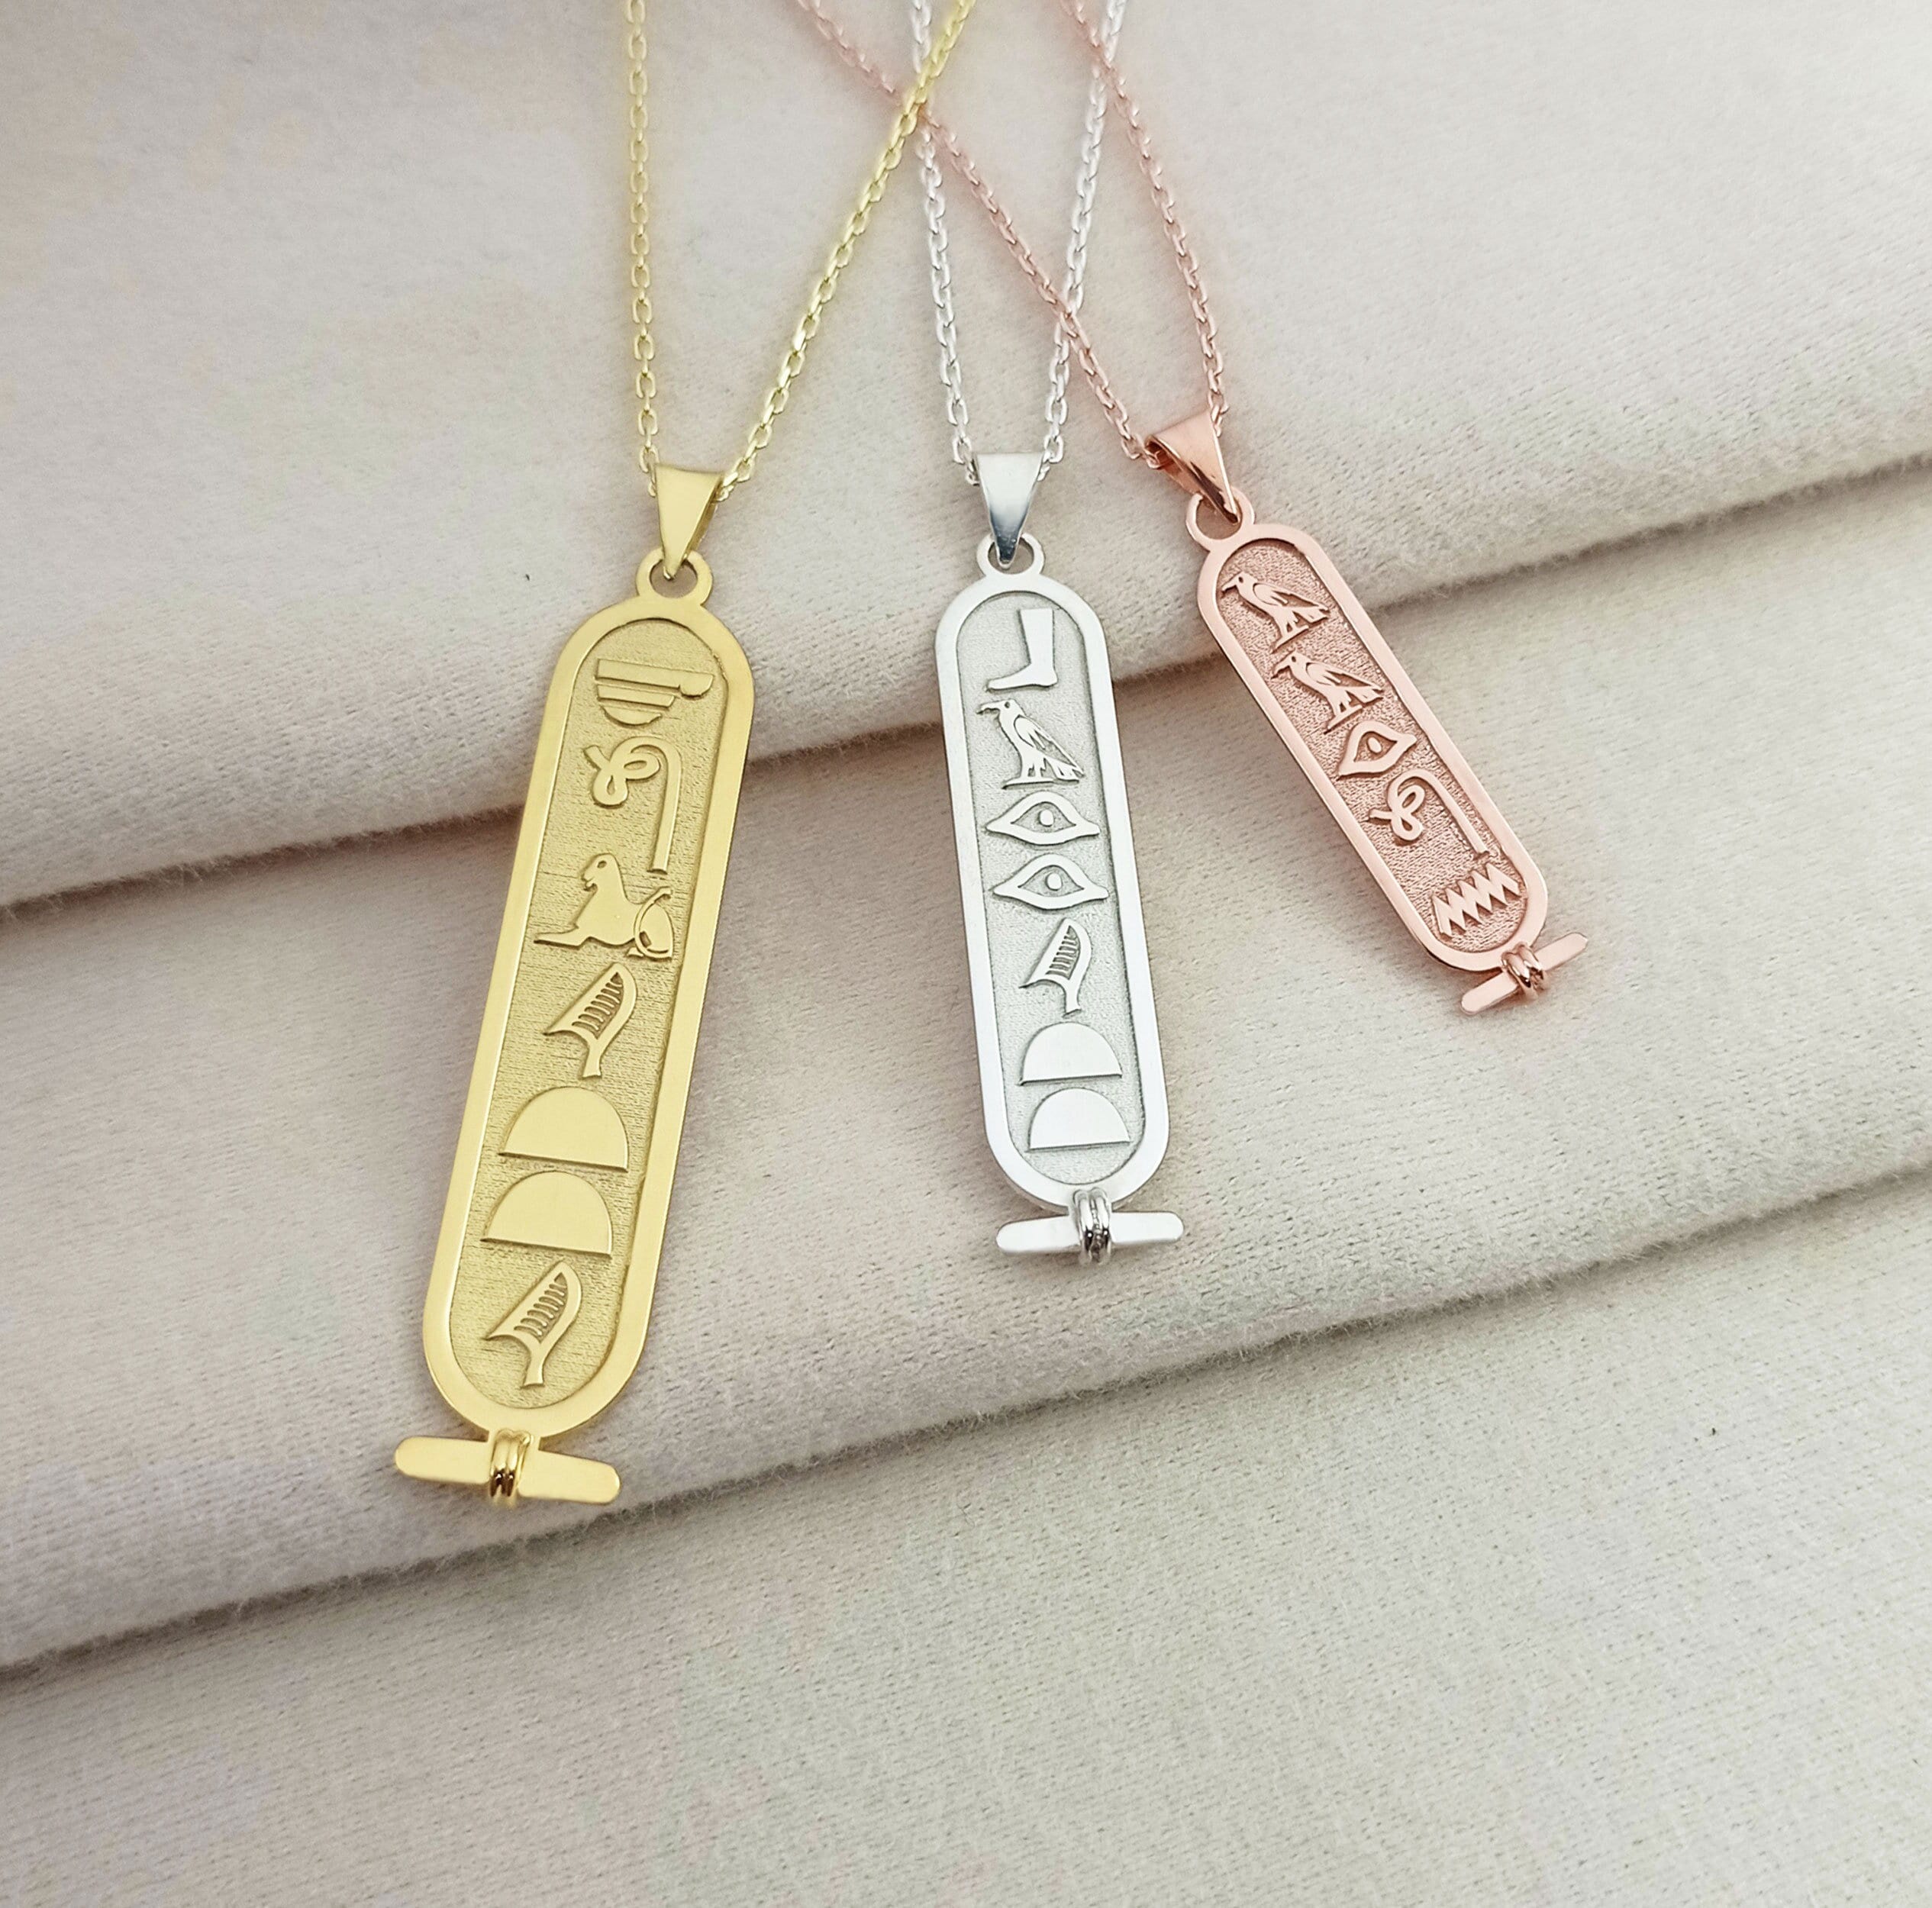 Cartouche Official Egyptian Cartouche jewelry and Resources